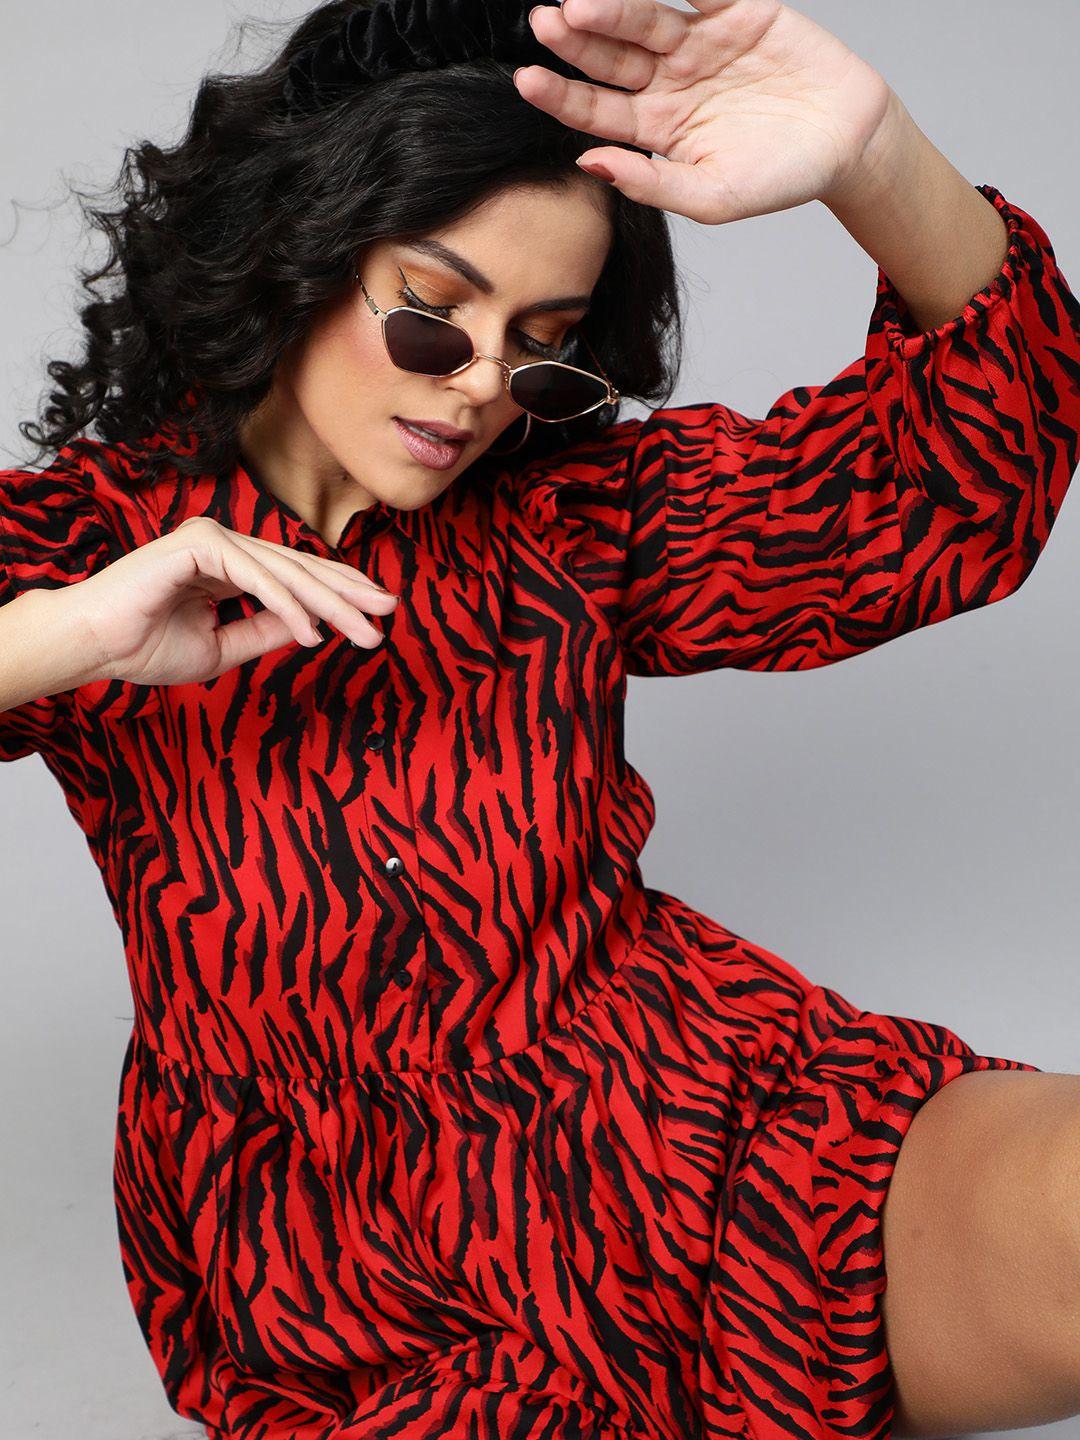 pluss-fiery-red-and-black-animal-printed-a-line-dress